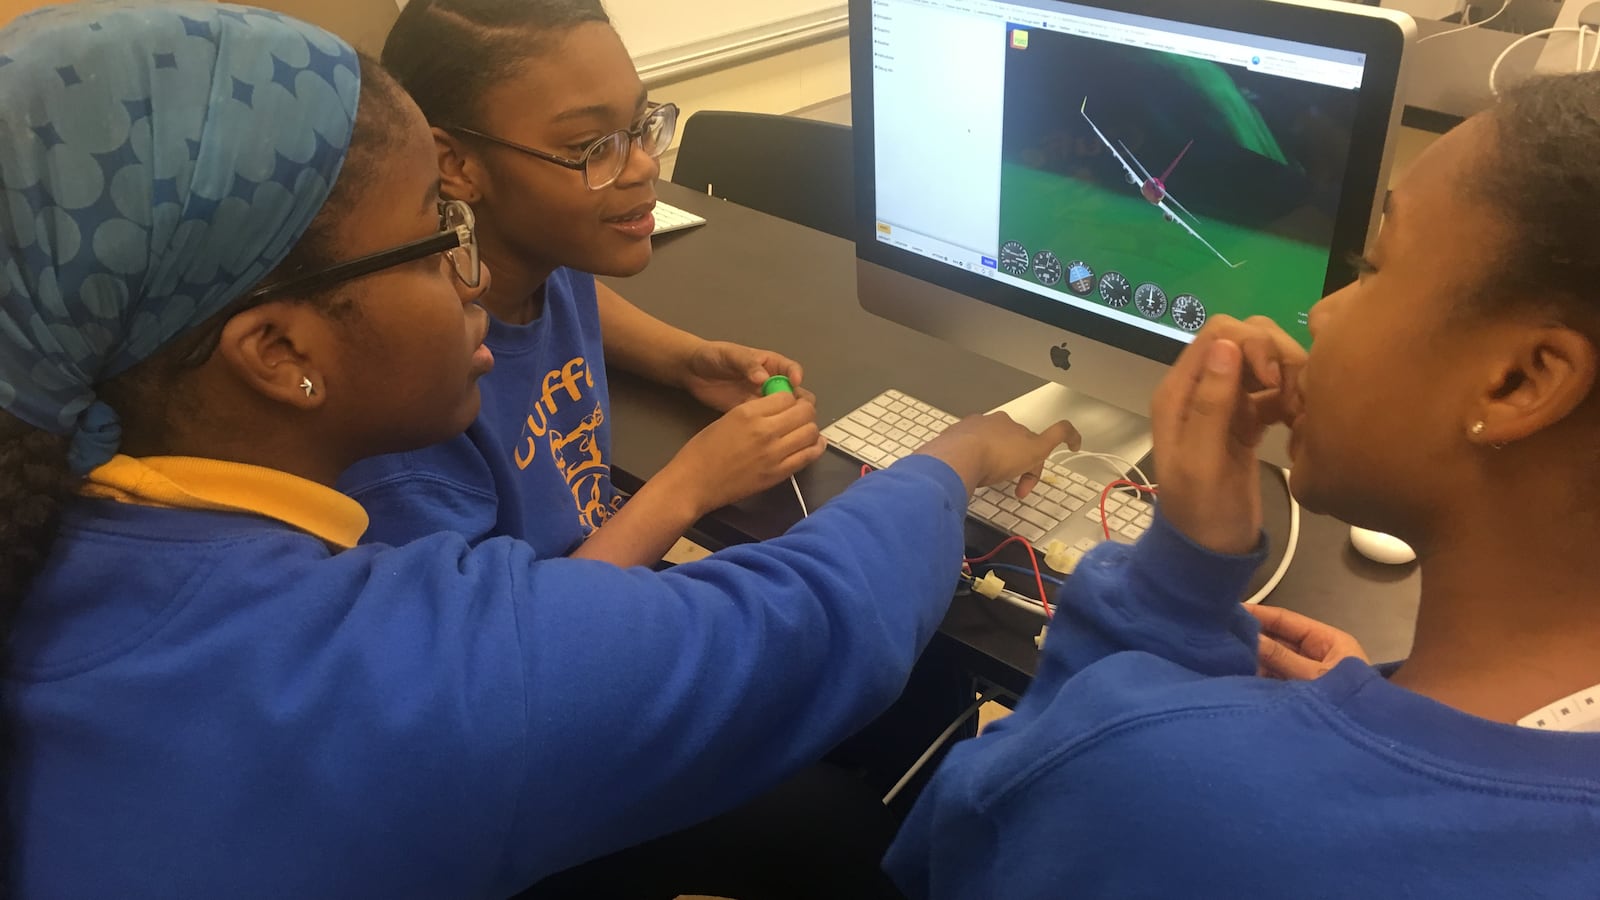 Vanessa Nwaige, center, works on a flight simulator at at Paul Cuffe Math-Science Technology Academy, an elementary school in Chicago on March 19, 2019. The school was one of 32 to receive funding from Chicago Public Schools to add high-demand programs.